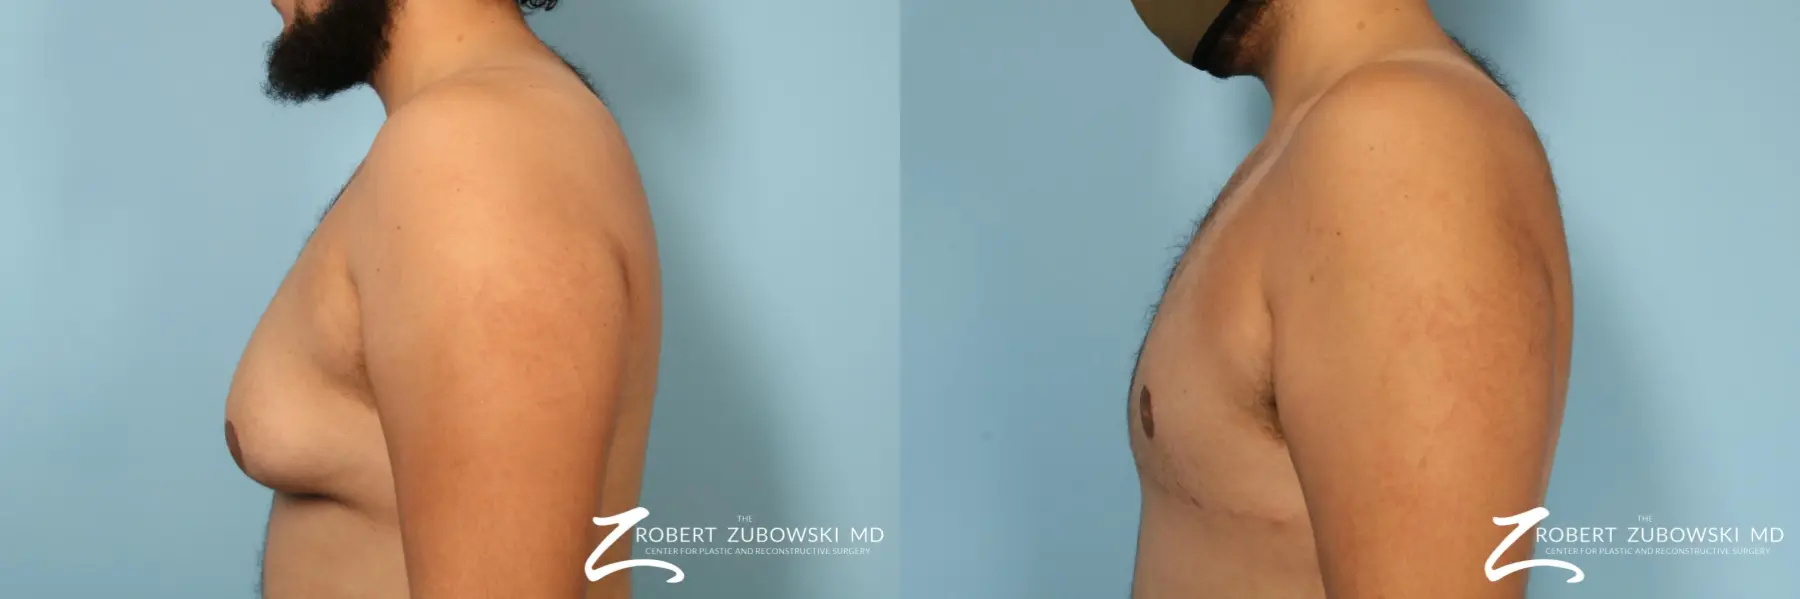 Gynecomastia: Patient 14 - Before and After 2